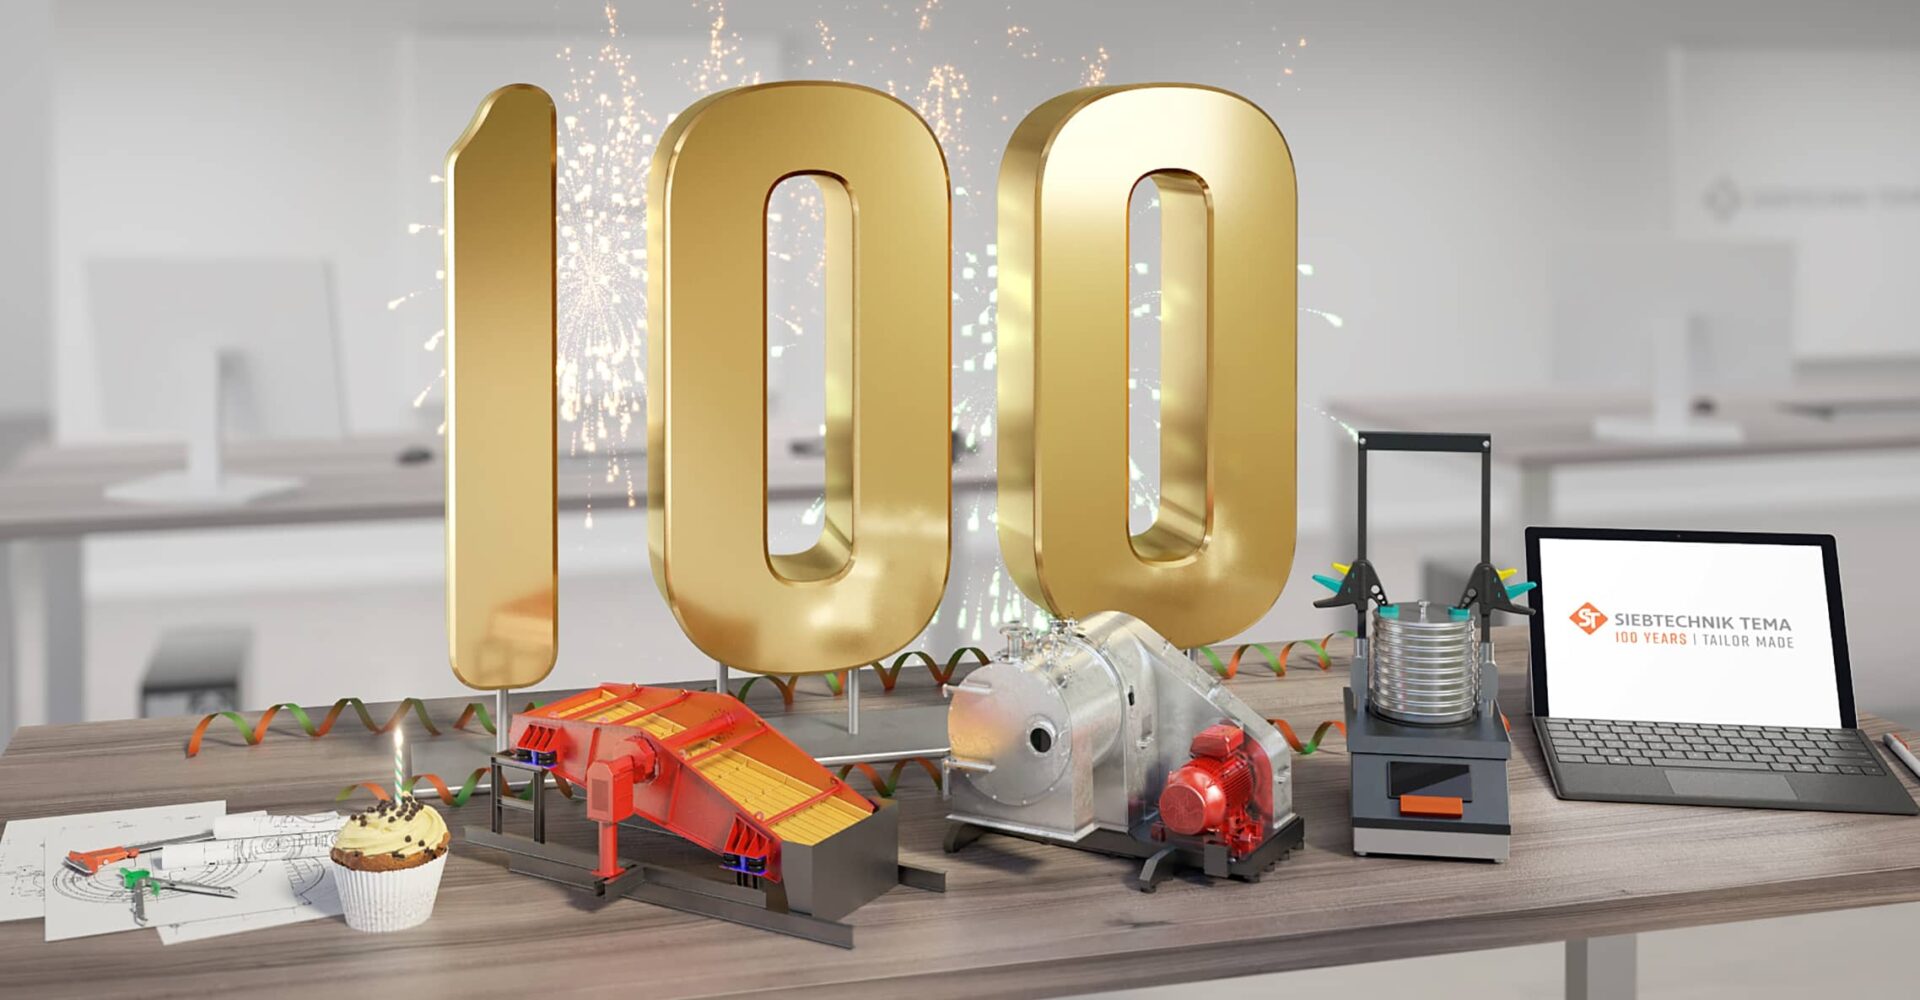 100 years SIEBTECHNIK TEMA, office with a desk on which a big golden 100 is standing, in front of it are models of some machines, a construction sketch and a laptop. The machines are a centrifuge, a screening machine and a test sieve shaker.